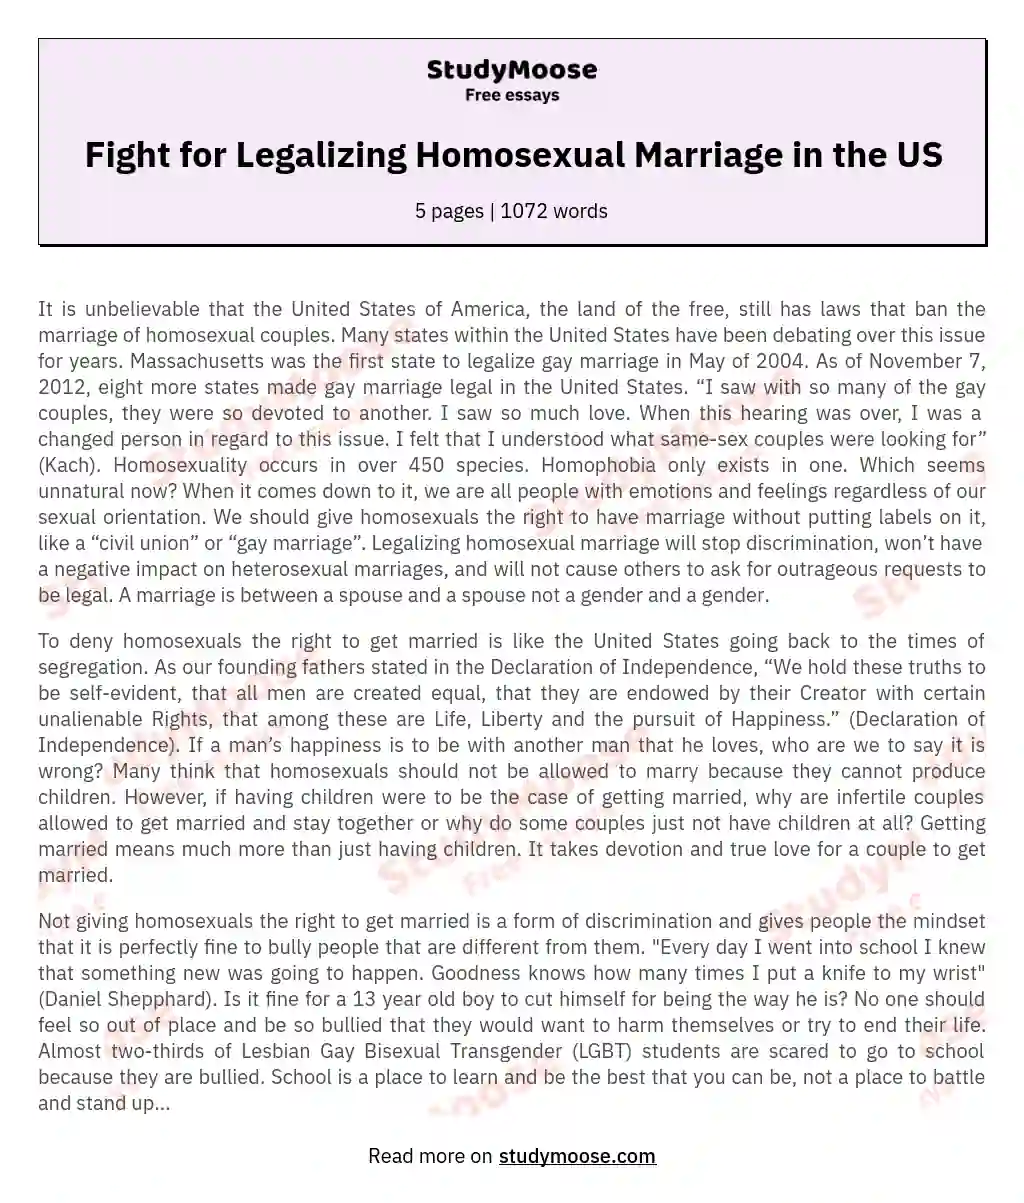 Fight for Legalizing Homosexual Marriage in the US essay